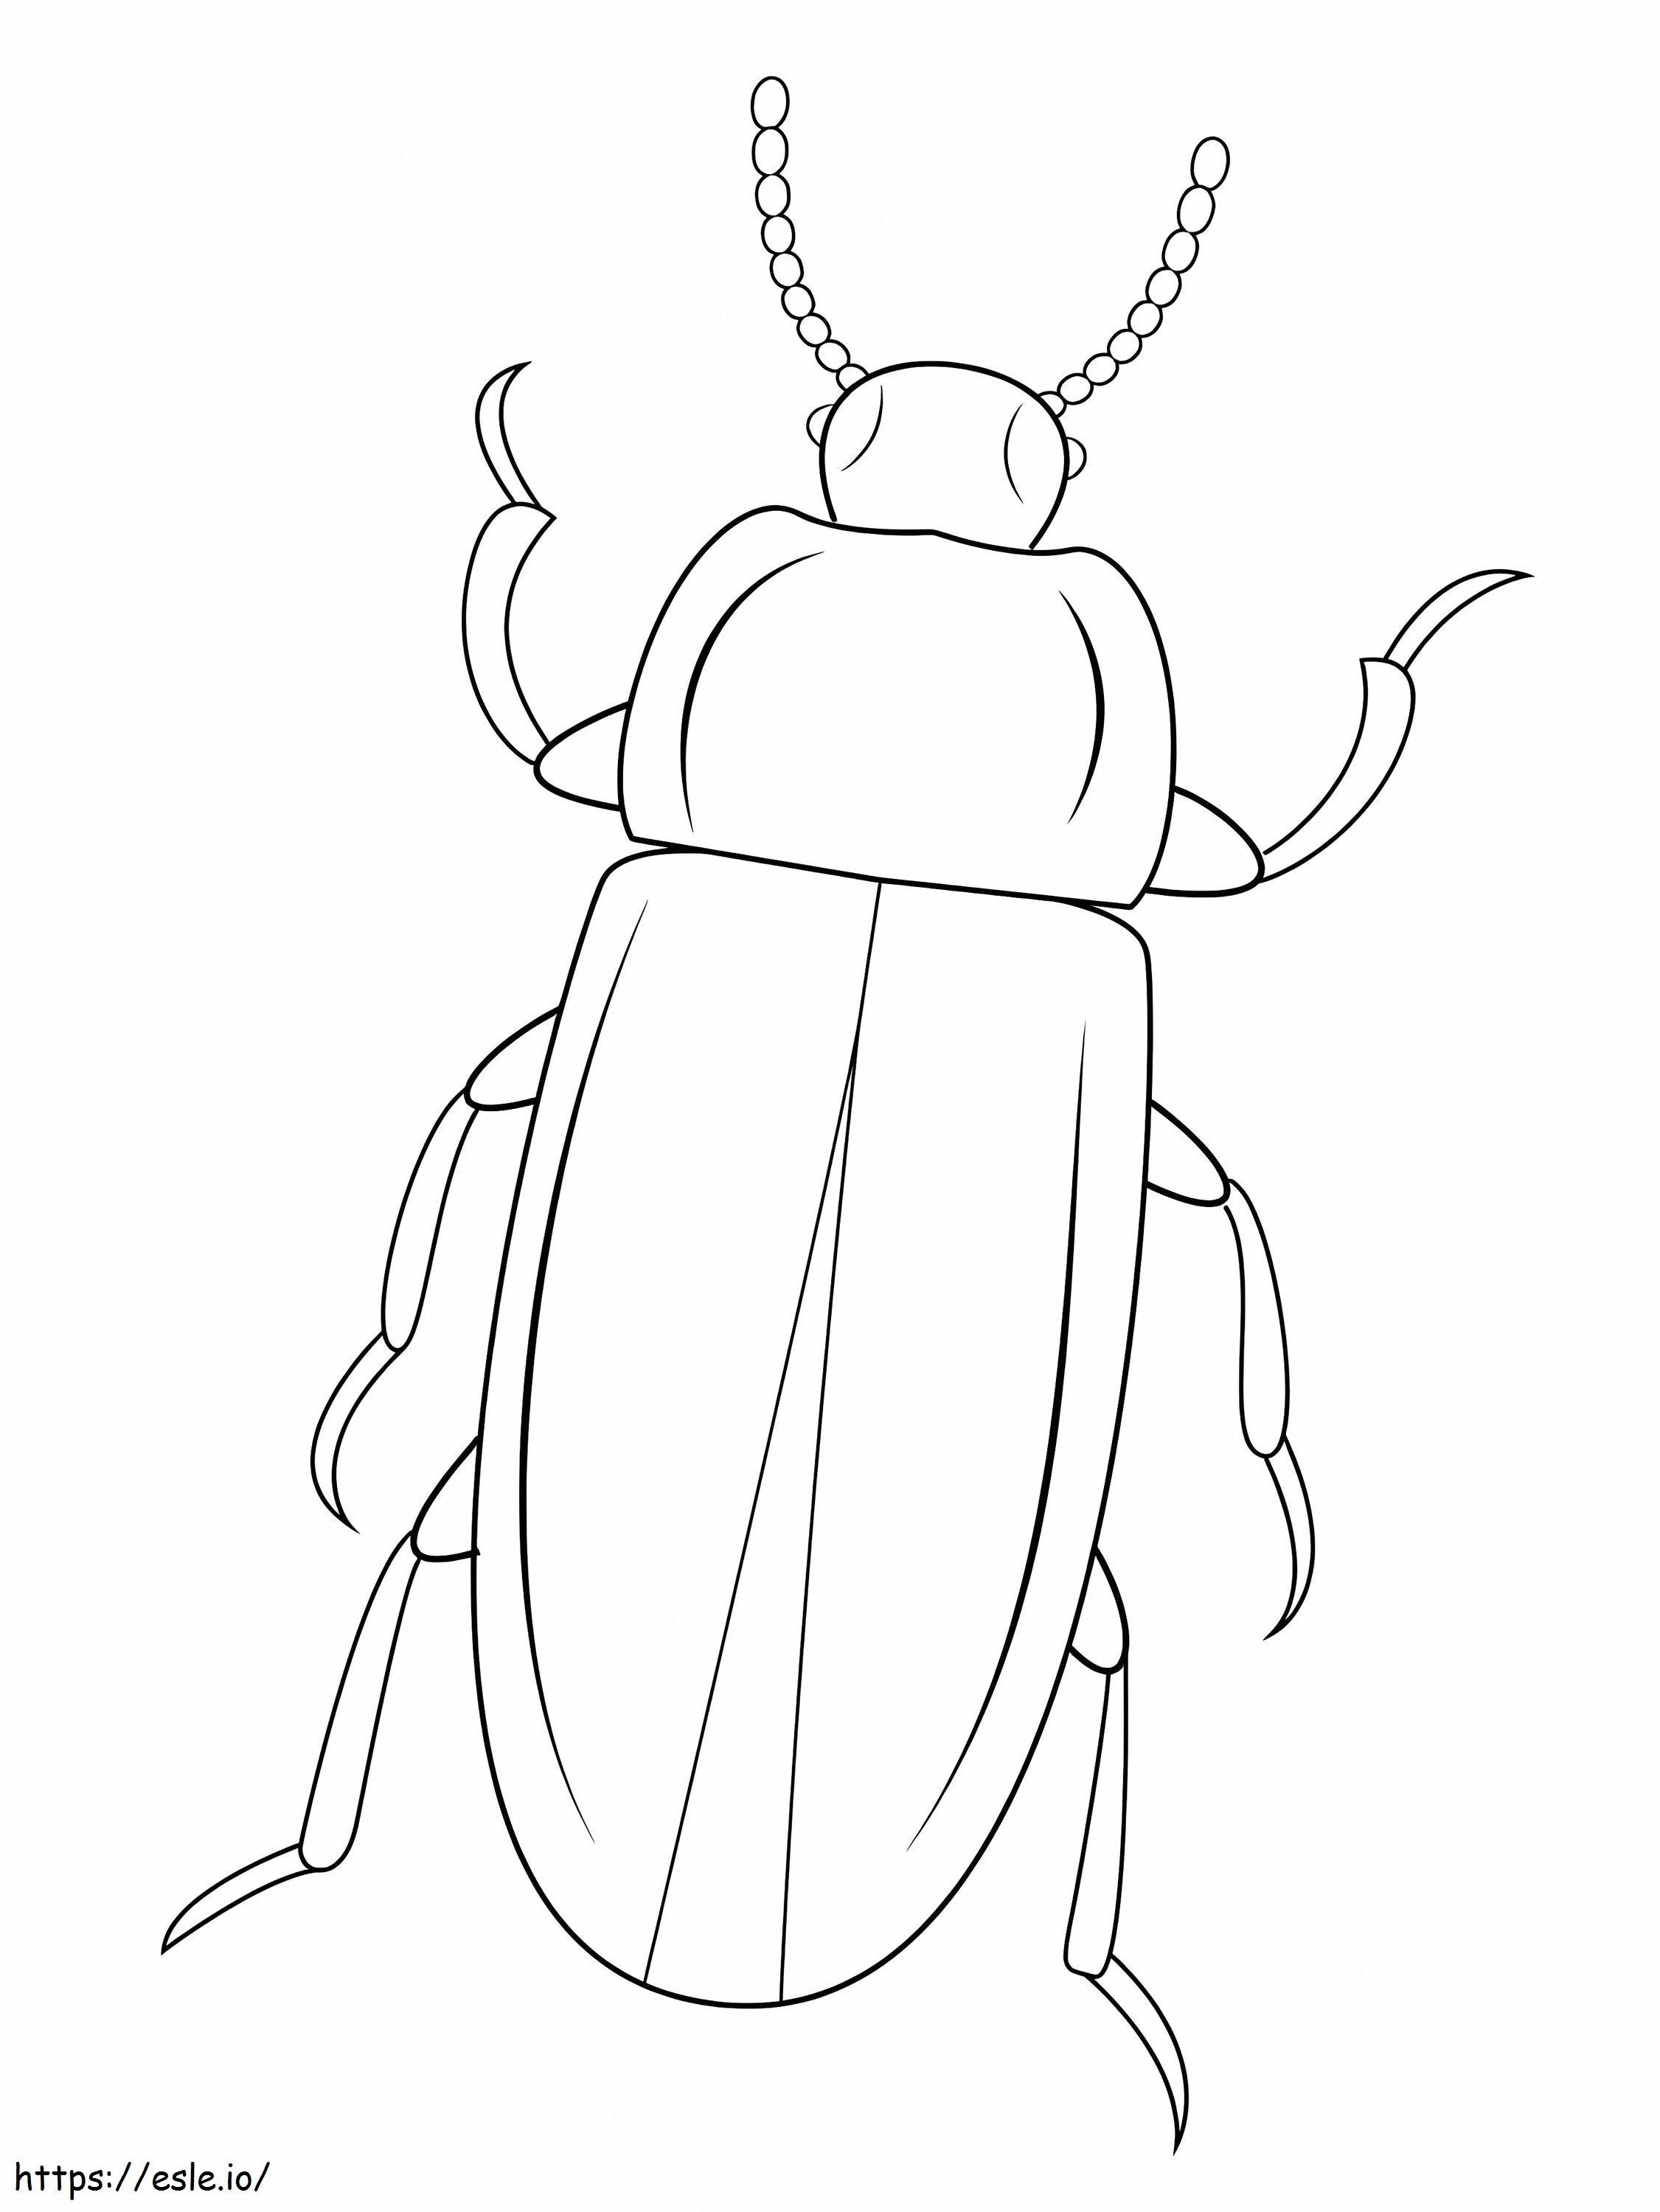 Mealworm Beetle coloring page